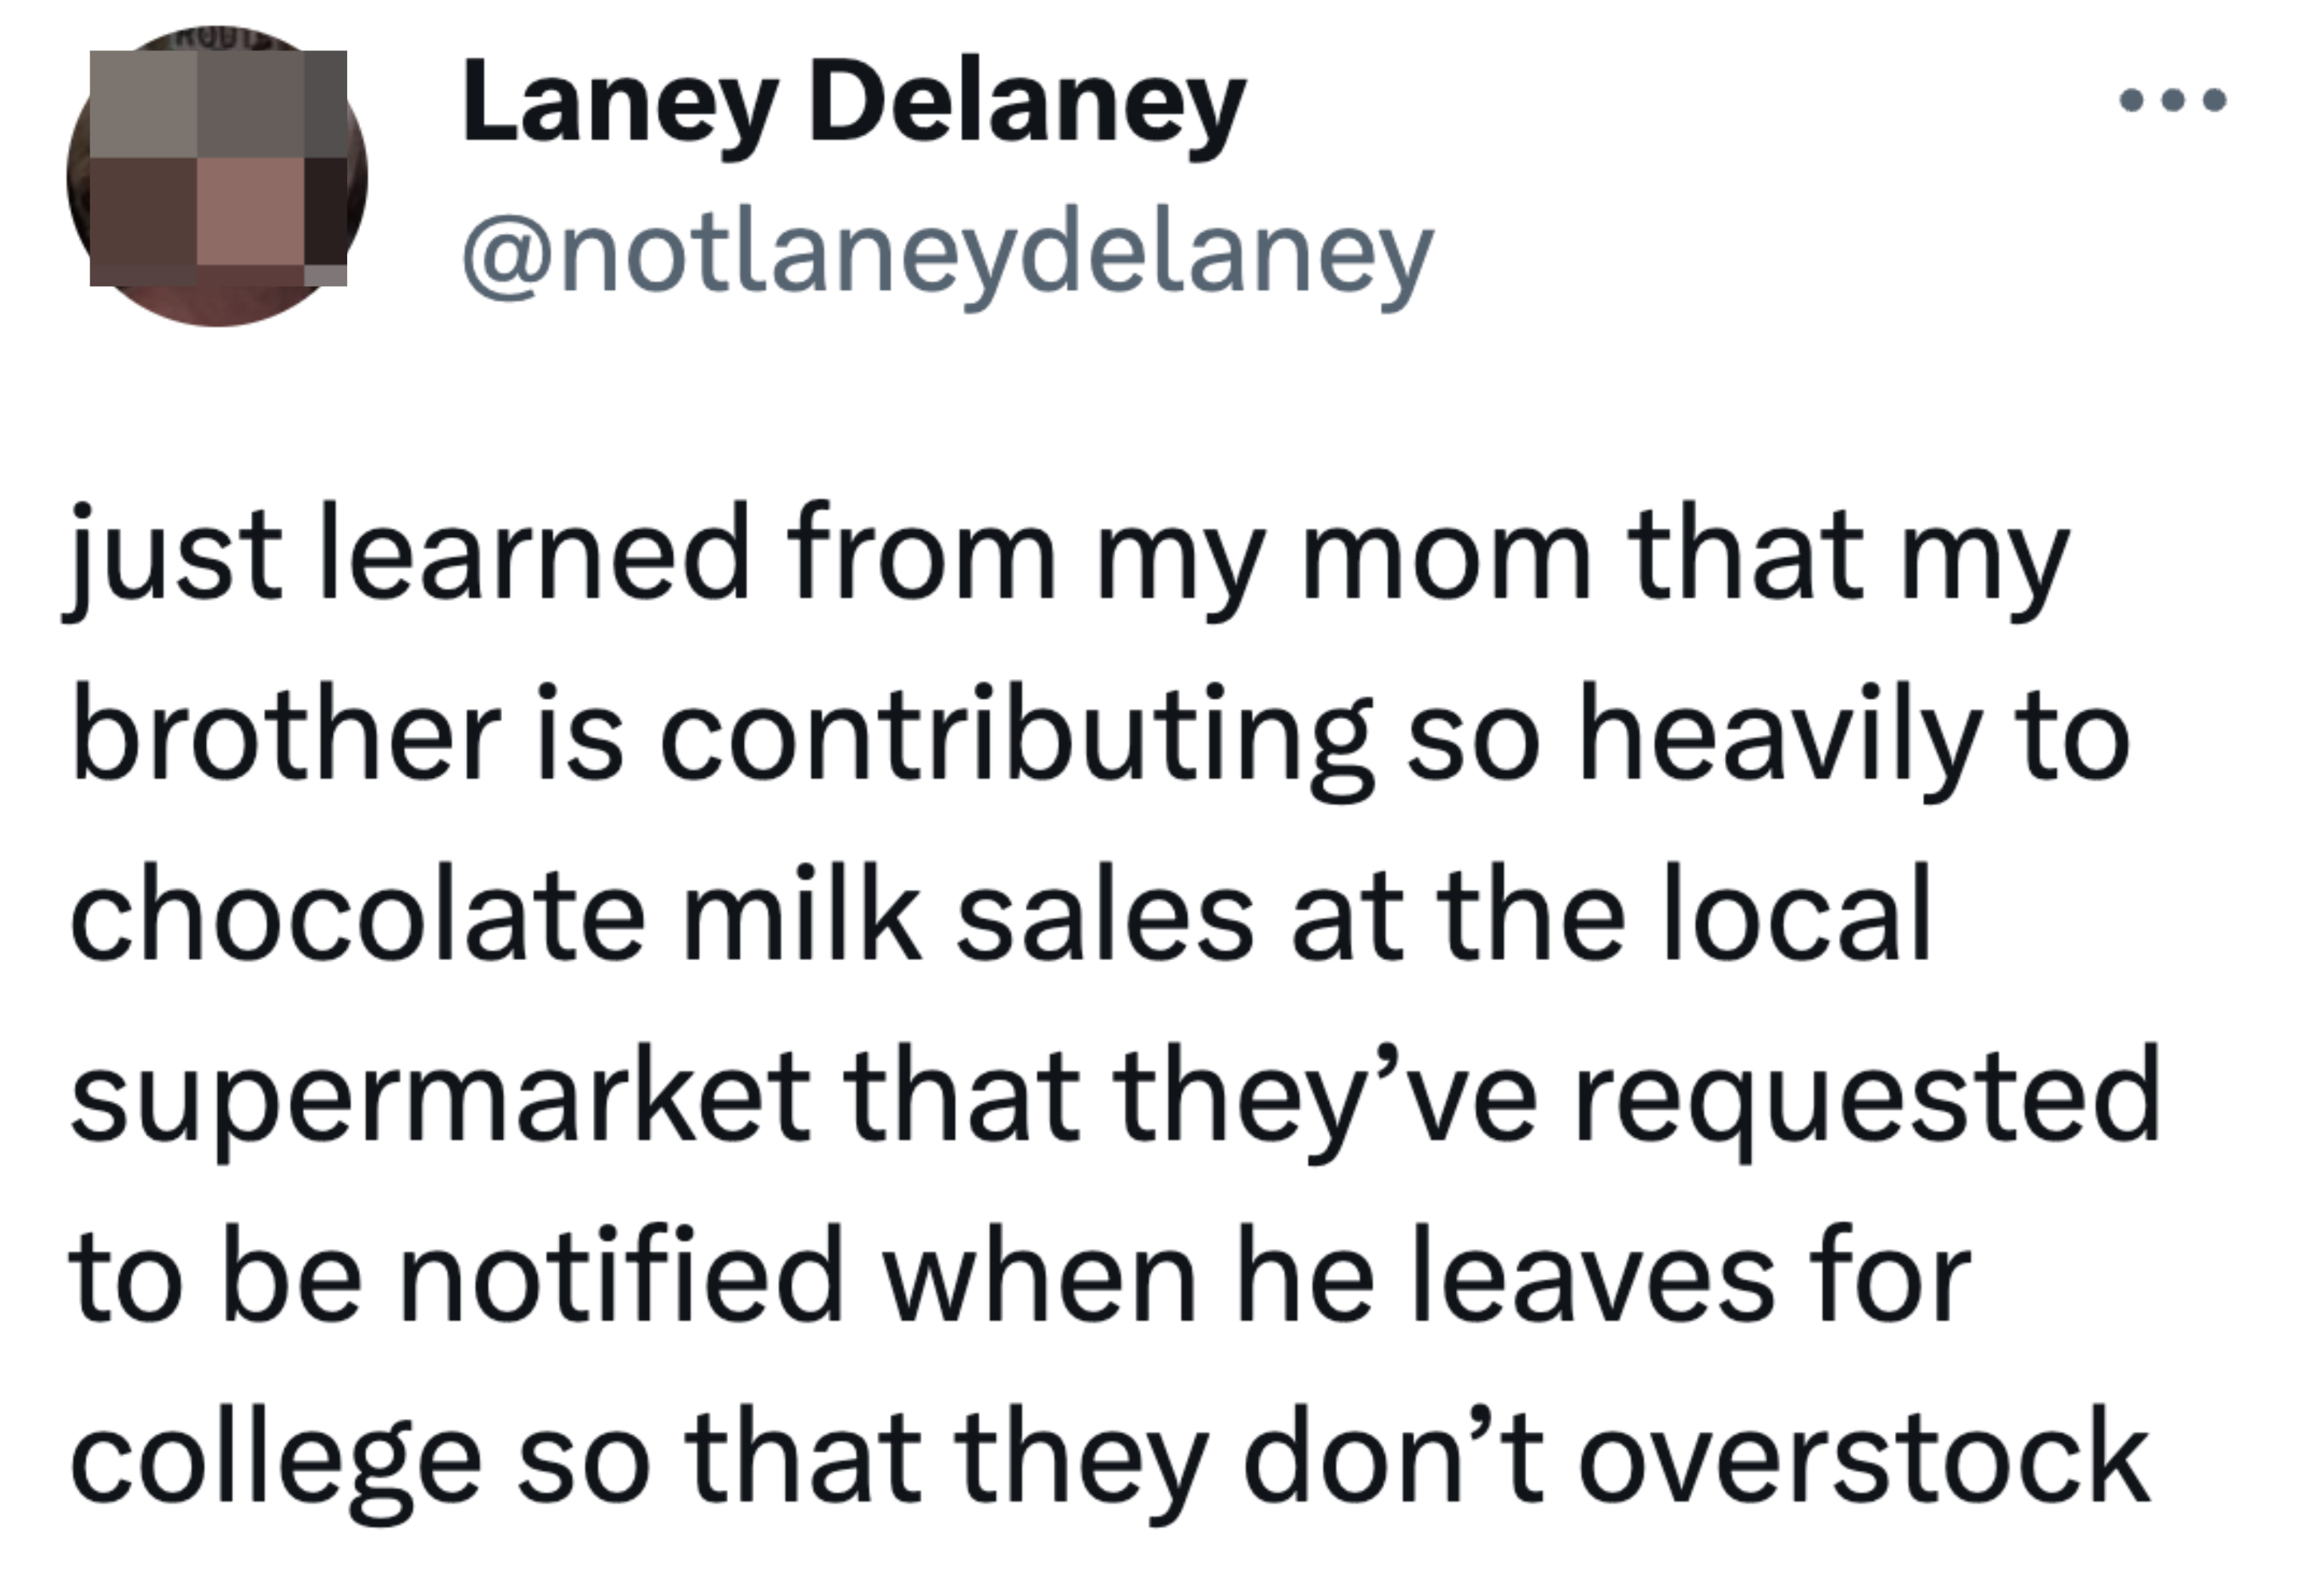 A mom was notified to let the supermarket know when her son goes to college so that they don&#x27;t overstock on chocolate milk once he leaves